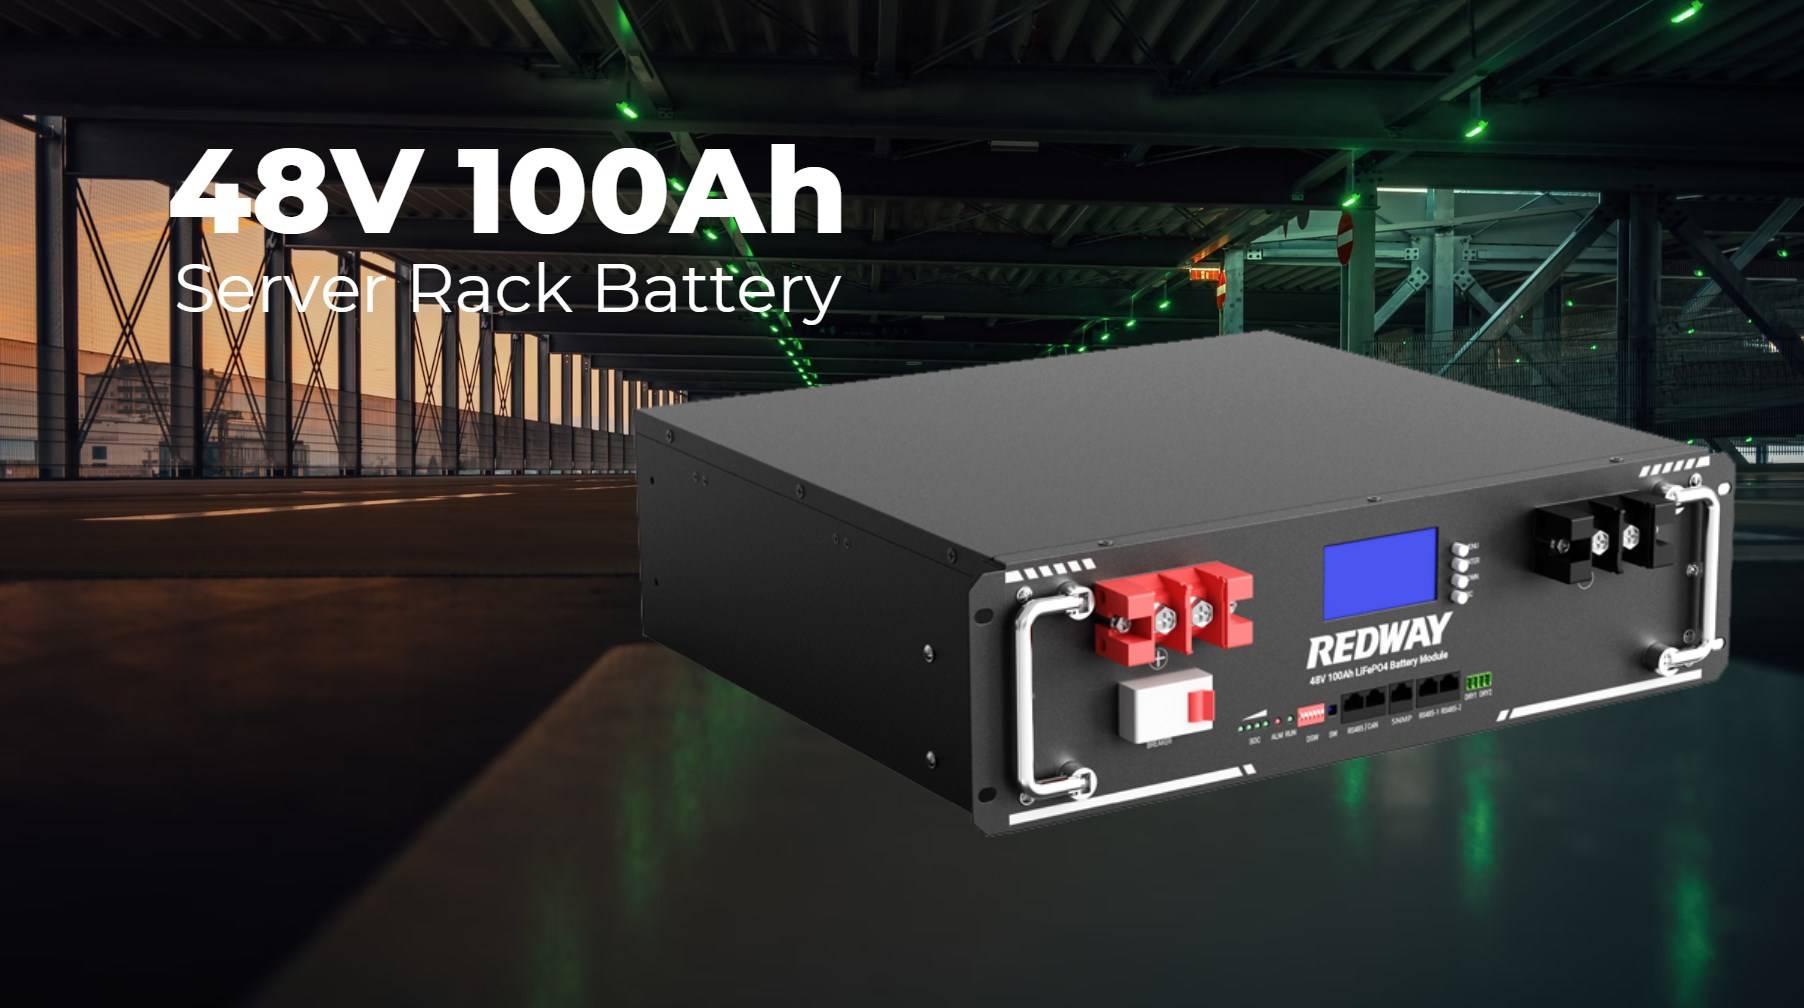 Rack Battery System Benifits Over Traditional Energy Storage Systems